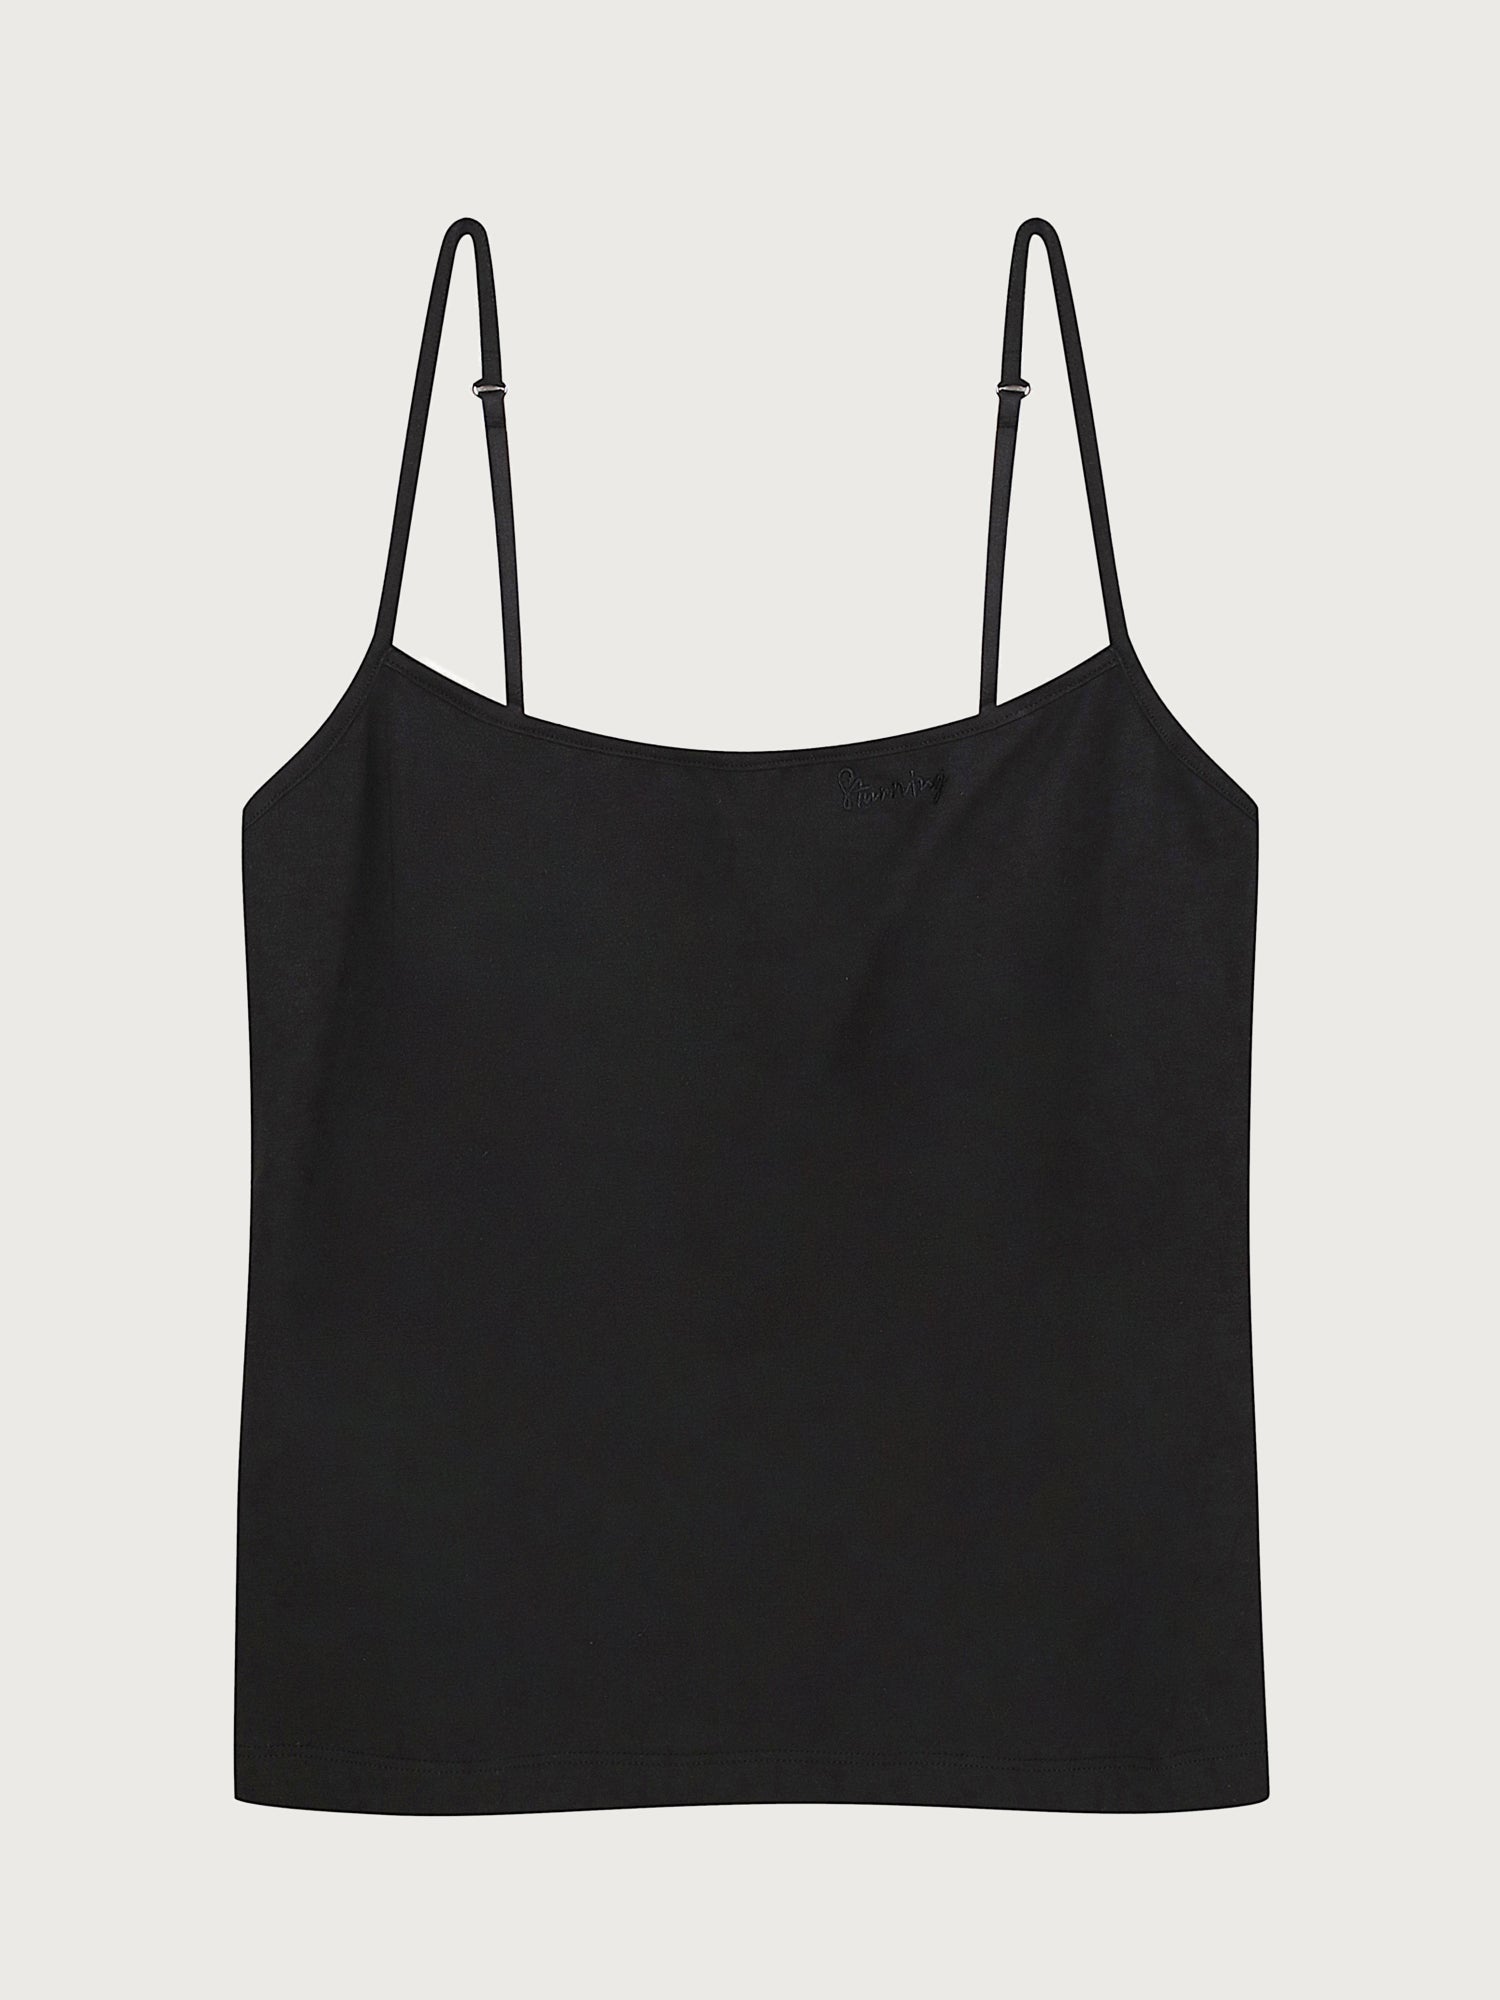 Black canisole top